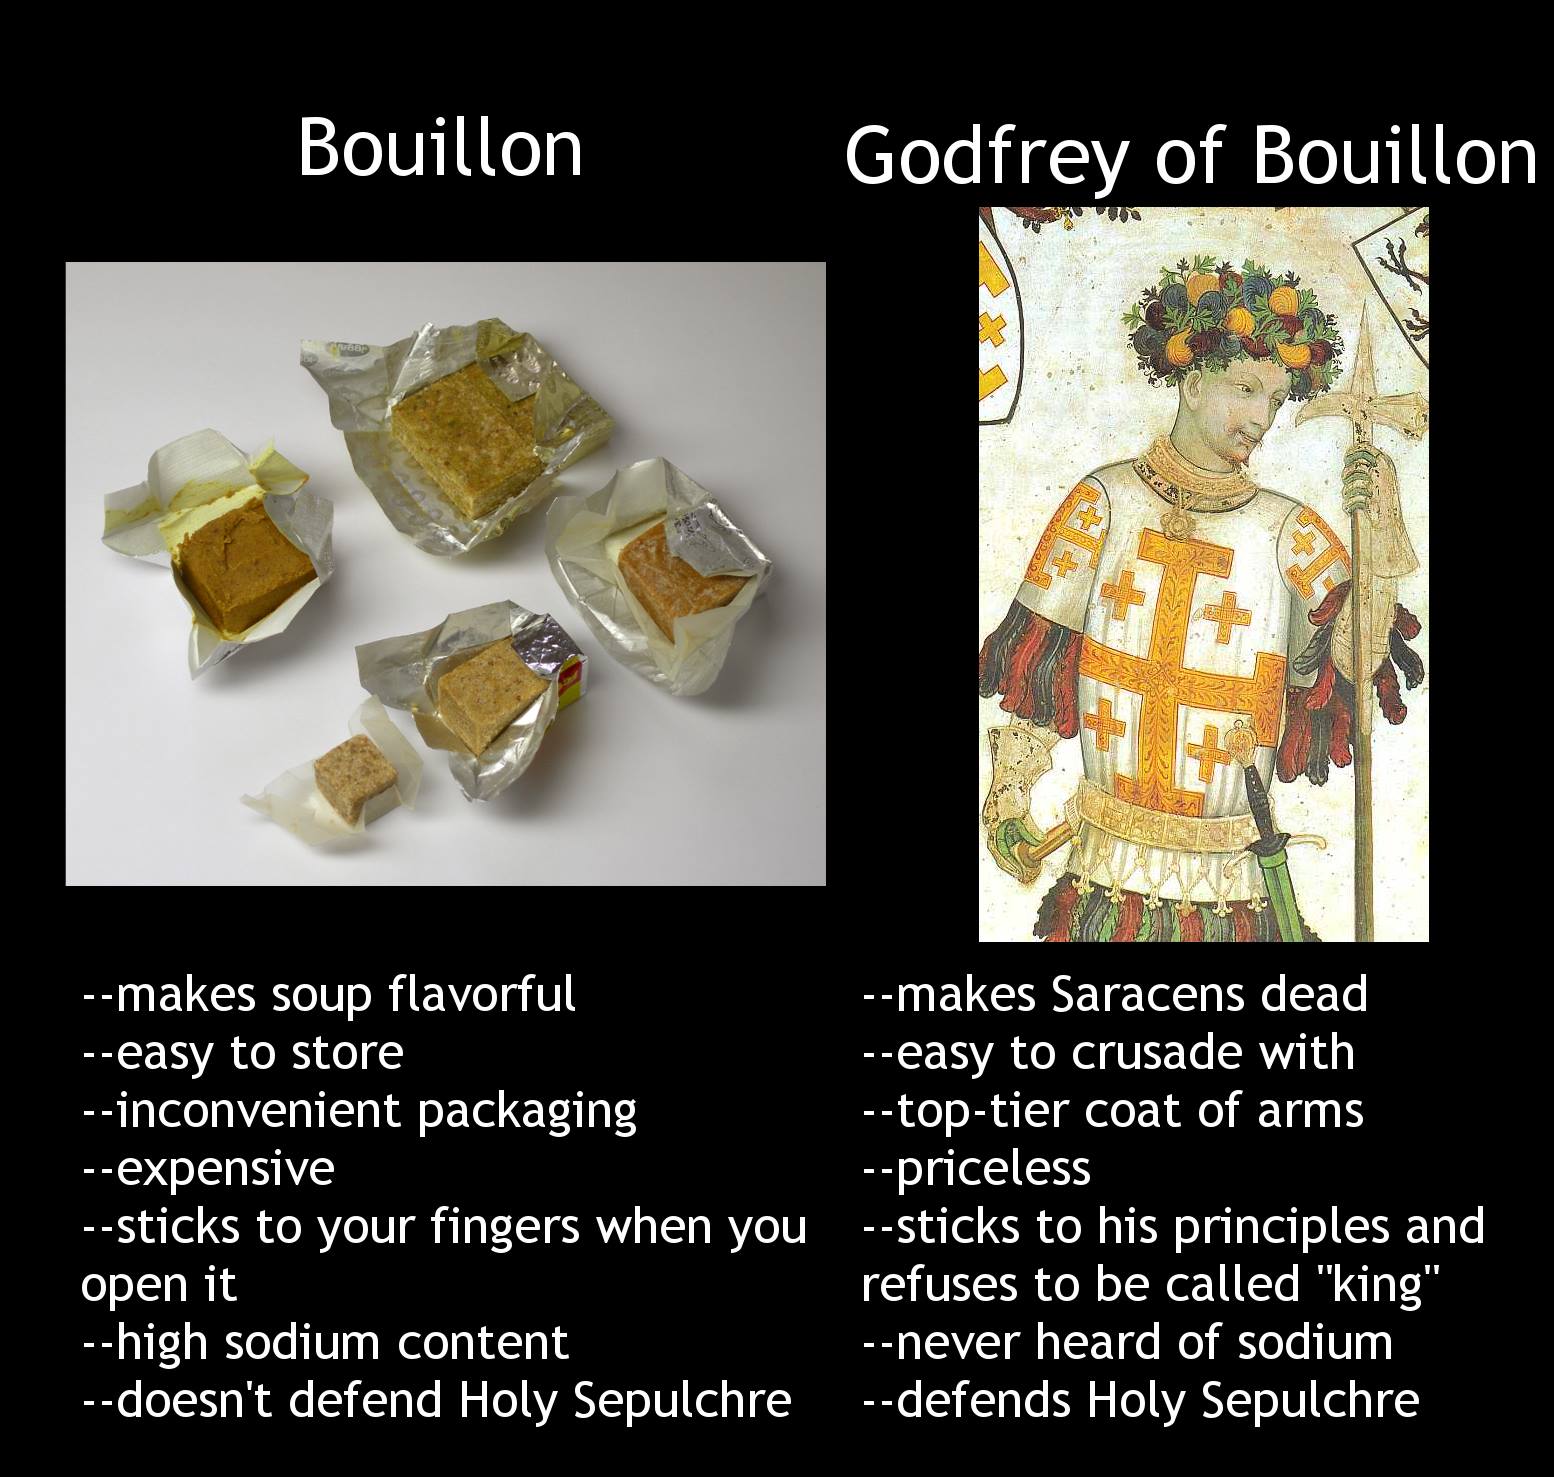 Bouillon: know the difference